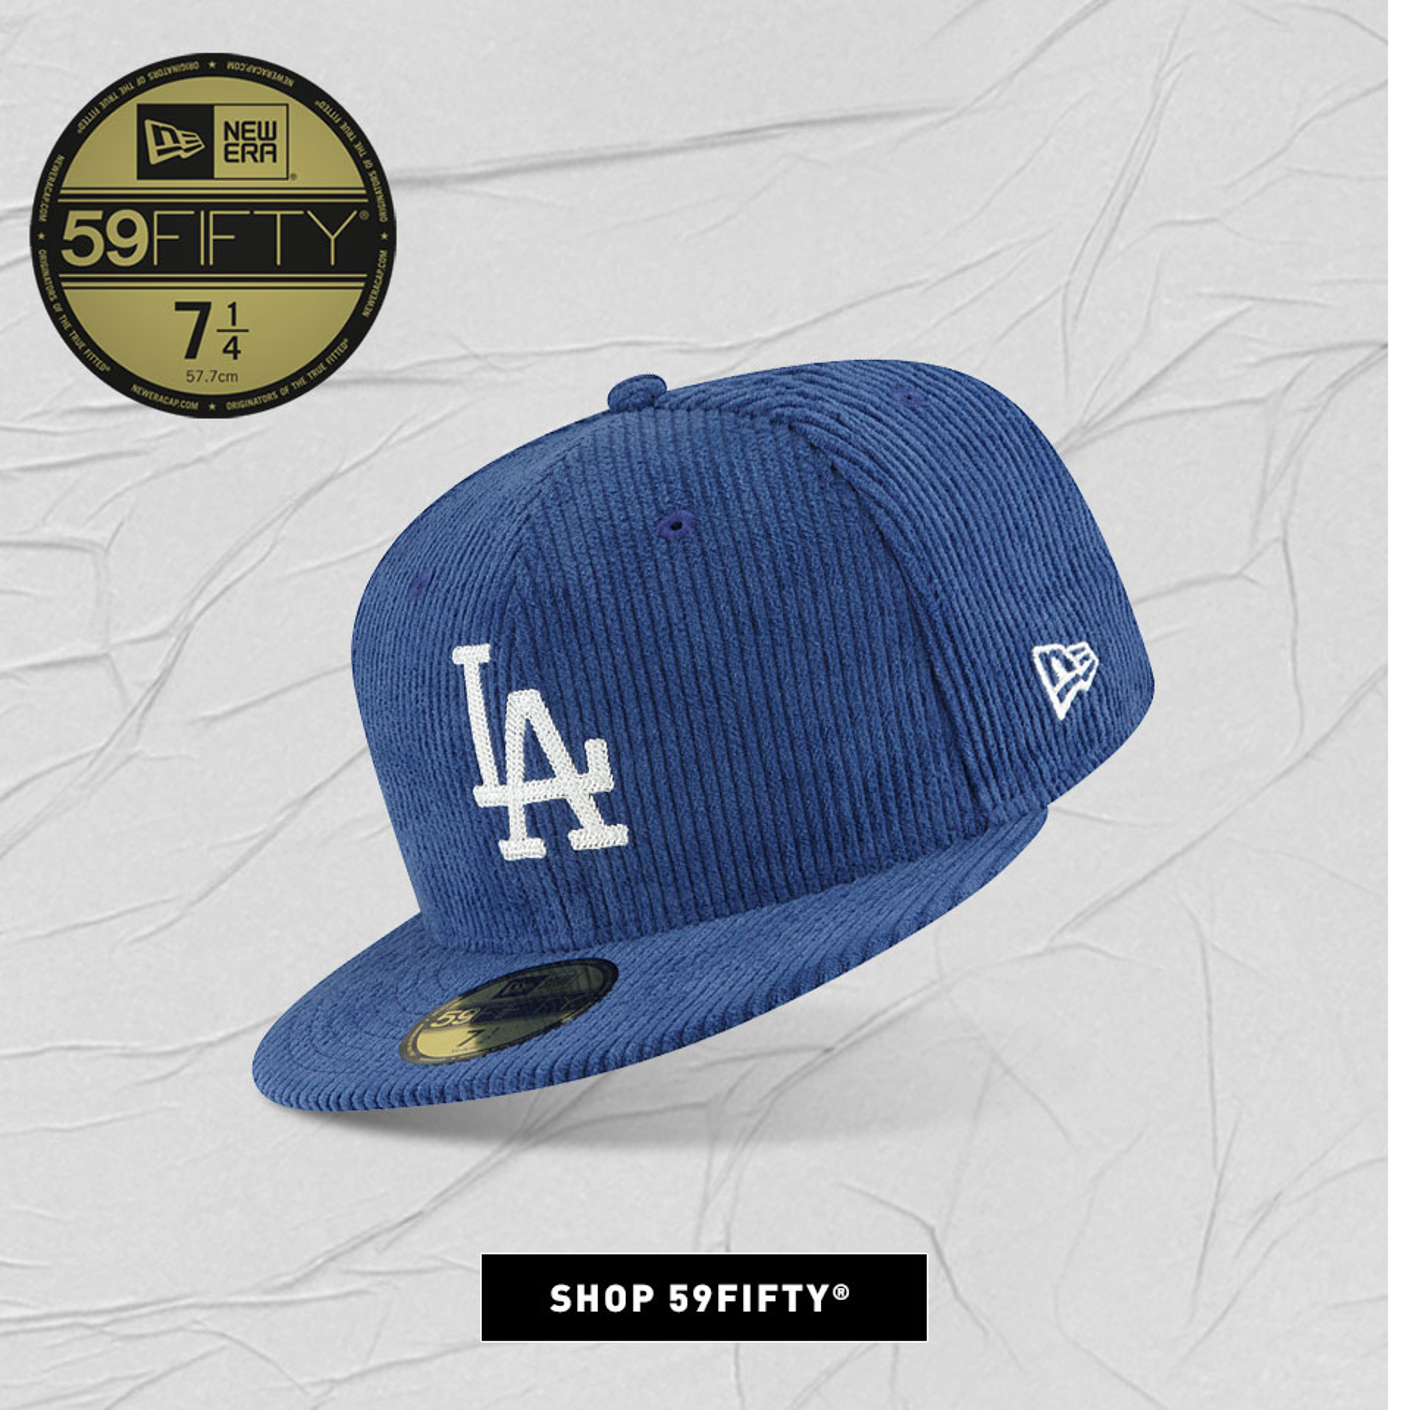 Button to shop 59FIFTY hats